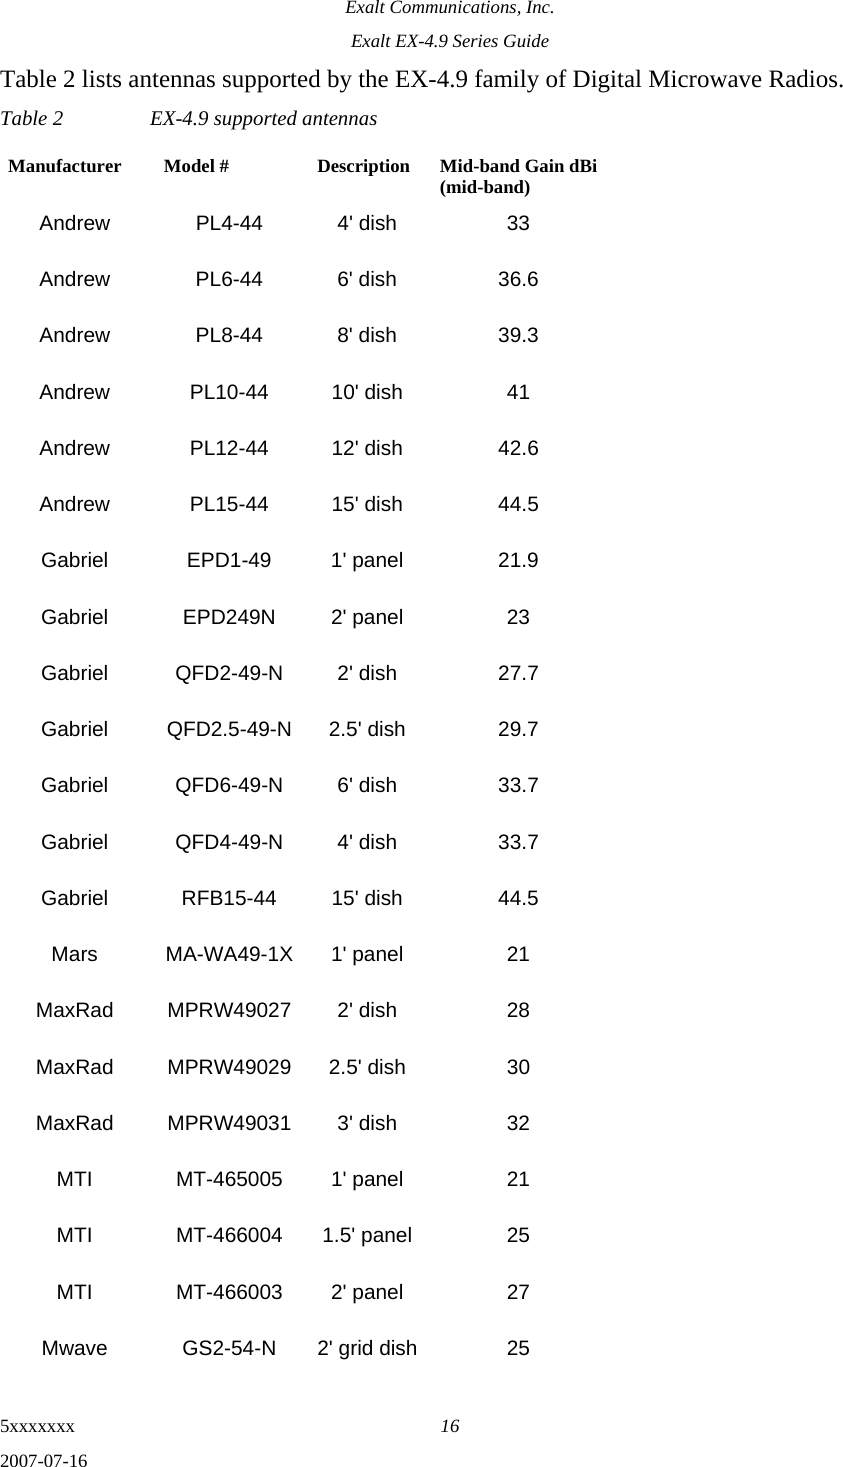 Exalt Communications, Inc. Exalt EX-4.9 Series Guide 5xxxxxxx  16 2007-07-16 Table 2 lists antennas supported by the EX-4.9 family of Digital Microwave Radios. Table 2  EX-4.9 supported antennas Manufacturer  Model #  Description  Mid-band Gain dBi(mid-band) Andrew PL4-44 4&apos; dish  33   Andrew PL6-44 6&apos; dish  36.6  Andrew PL8-44 8&apos; dish  39.3  Andrew PL10-44 10&apos; dish  41   Andrew PL12-44 12&apos; dish  42.6  Andrew PL15-44 15&apos; dish  44.5  Gabriel EPD1-49 1&apos; panel  21.9   Gabriel EPD249N 2&apos; panel  23   Gabriel QFD2-49-N 2&apos; dish  27.7   Gabriel QFD2.5-49-N 2.5&apos; dish  29.7   Gabriel QFD6-49-N 6&apos; dish  33.7   Gabriel QFD4-49-N 4&apos; dish  33.7   Gabriel RFB15-44 15&apos; dish  44.5   Mars MA-WA49-1X 1&apos; panel  21   MaxRad MPRW49027 2&apos; dish  28   MaxRad MPRW49029 2.5&apos; dish  30   MaxRad MPRW49031 3&apos; dish  32   MTI MT-465005 1&apos; panel  21   MTI MT-466004 1.5&apos; panel  25   MTI MT-466003 2&apos; panel  27   Mwave  GS2-54-N  2&apos; grid dish 25   